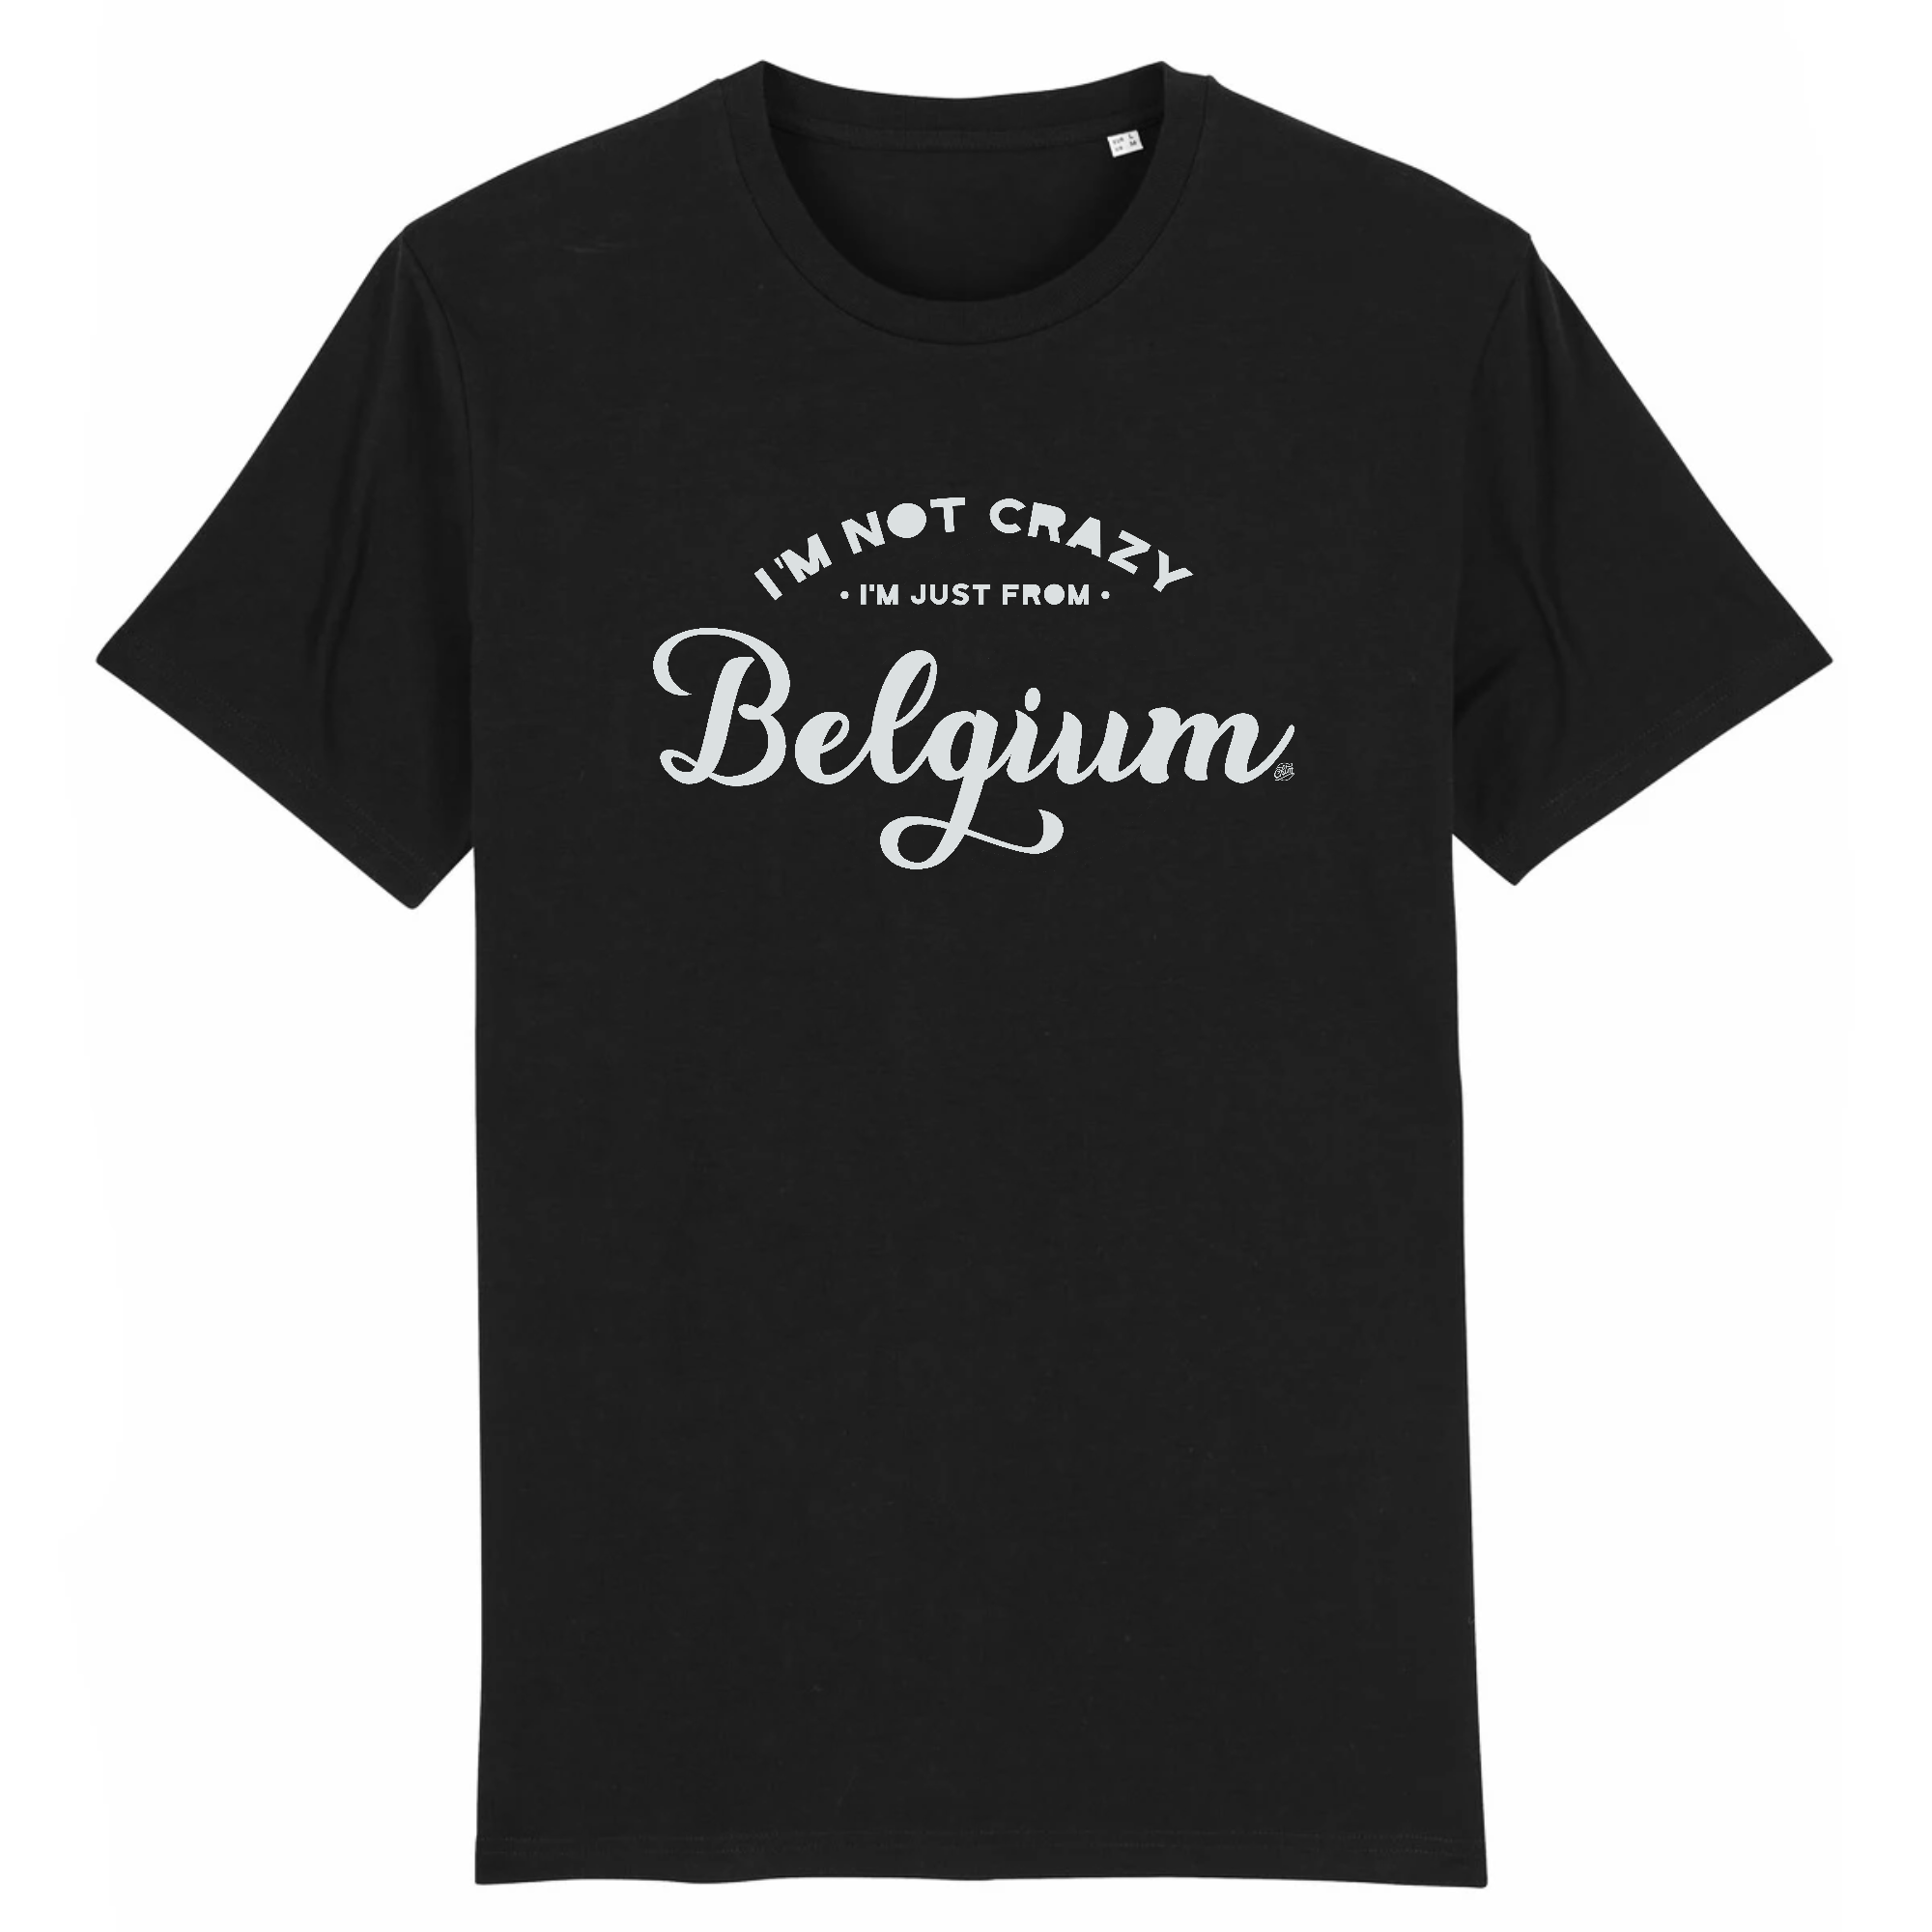 T-Shirt - "I'M JUST FROM BELGIUM"